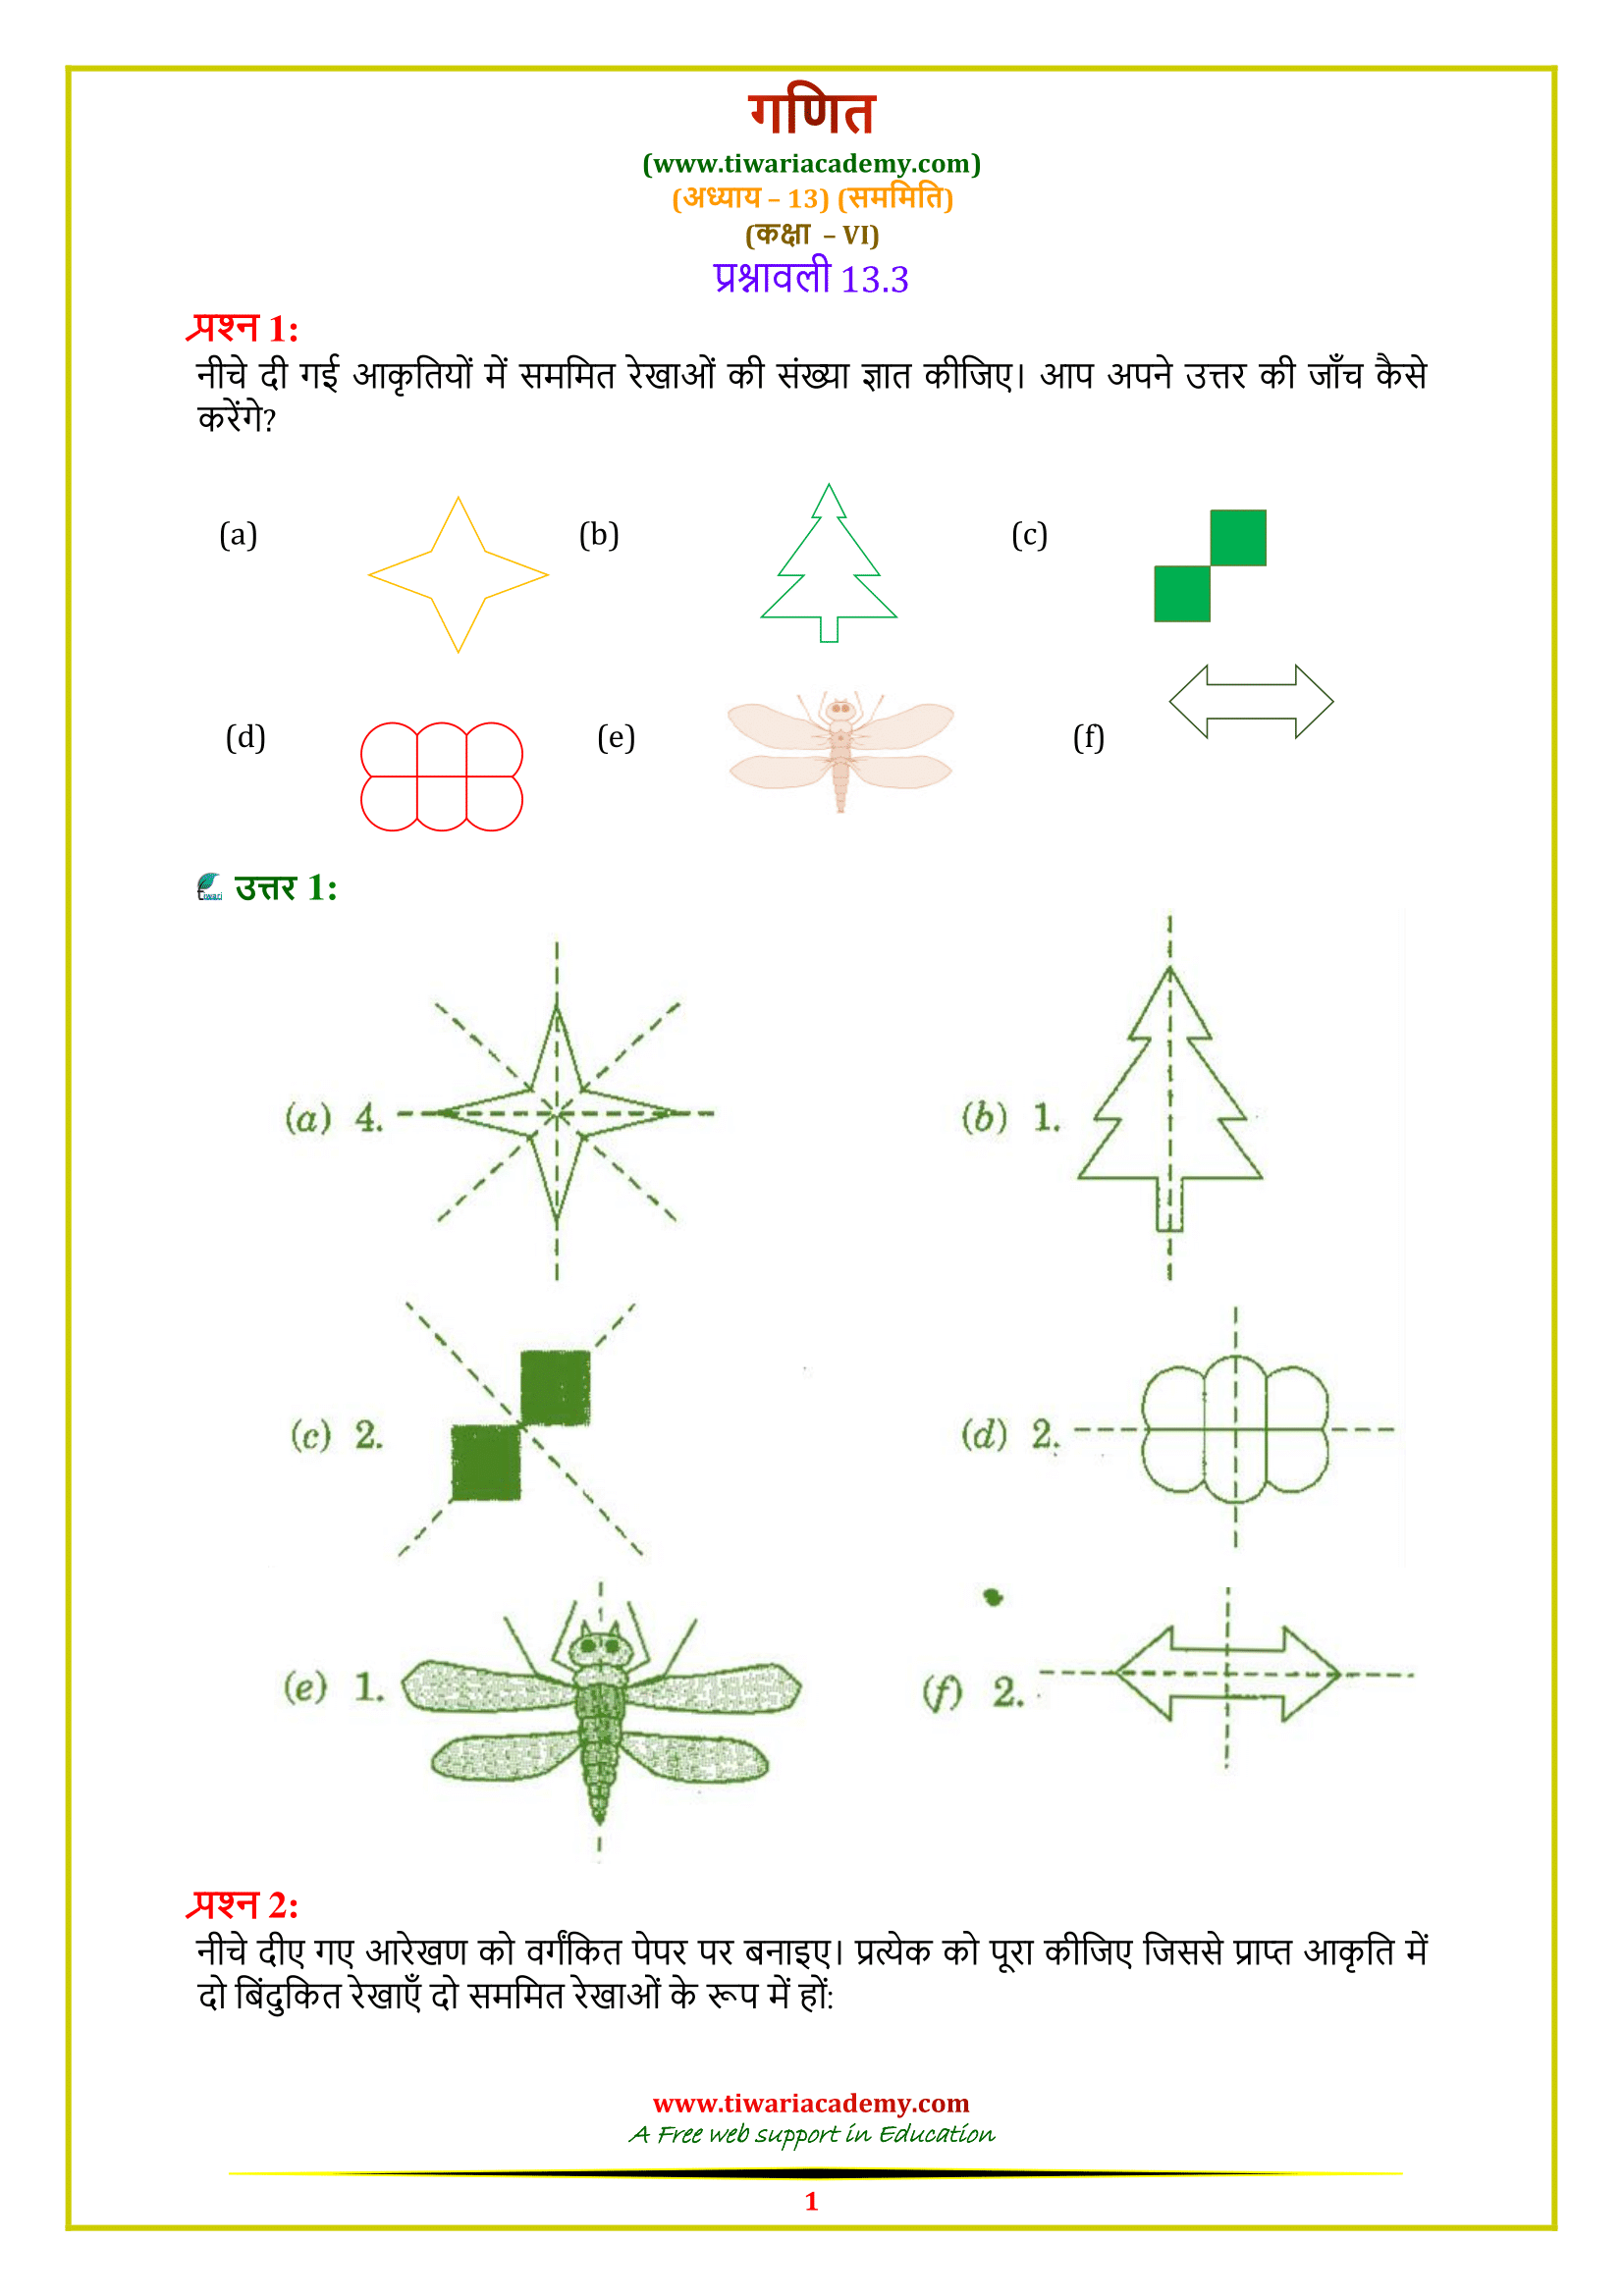 6 Maths Chapter 13 Exercise 13.3 solutions